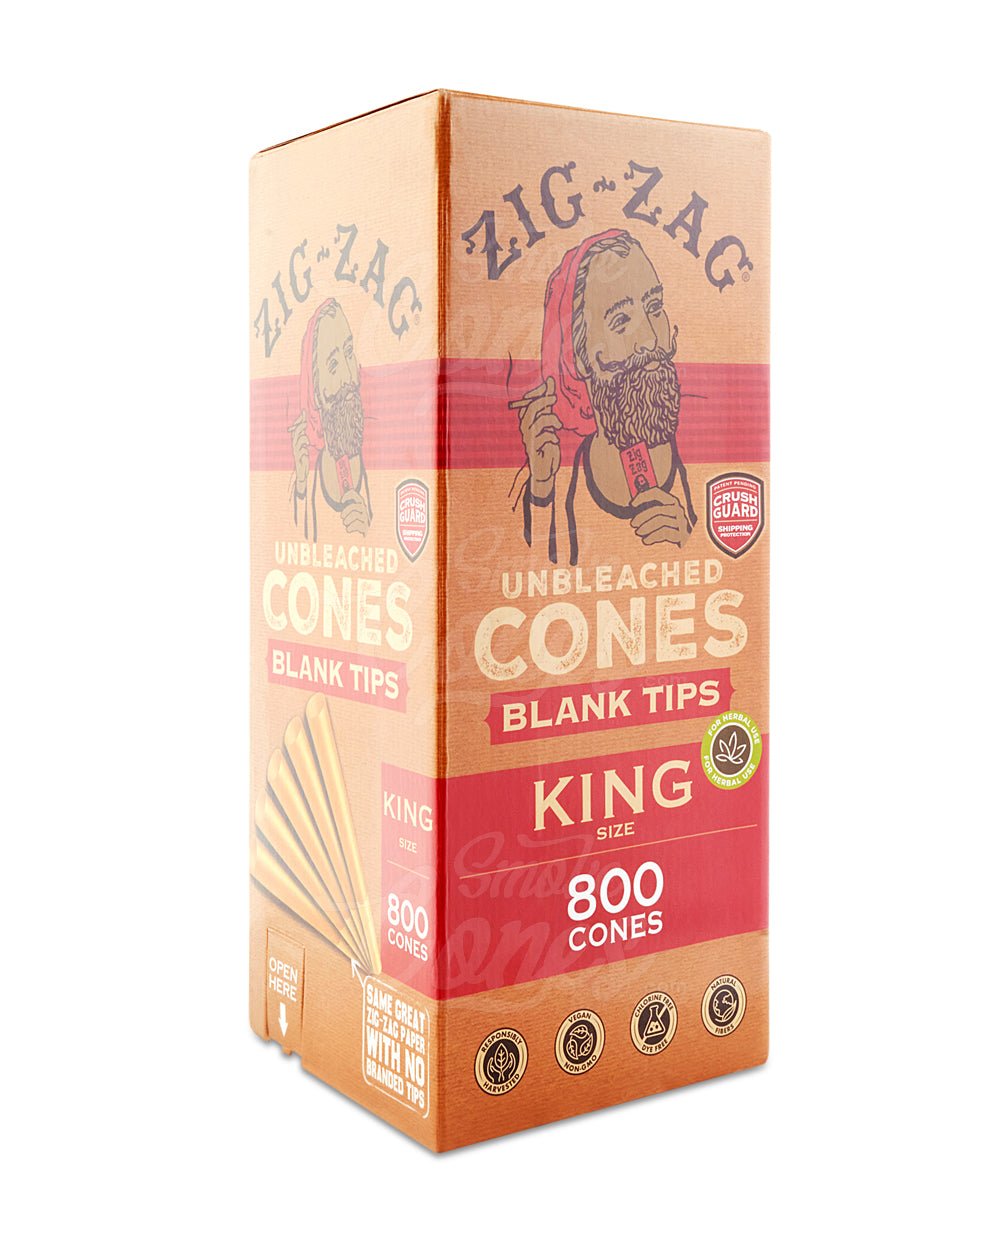 OCB 109mm King Sized Virgin Pre Rolled Unbleached Paper Cones 800/Box